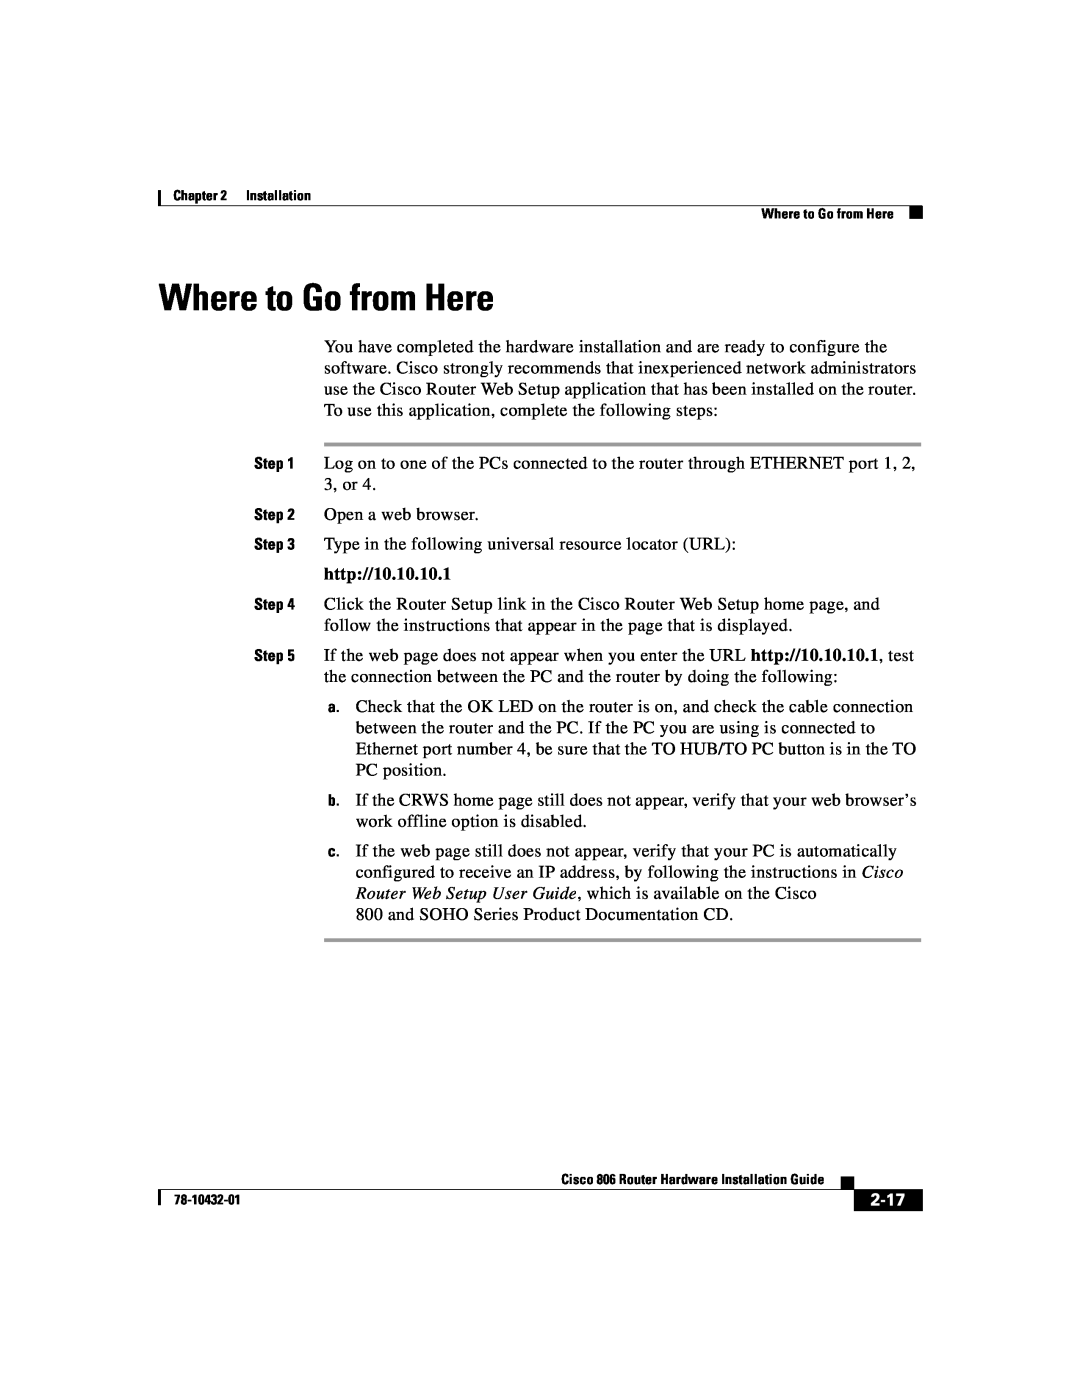 Cisco Systems 806 manual Where to Go from Here, 2-17, http//10.10.10.1 